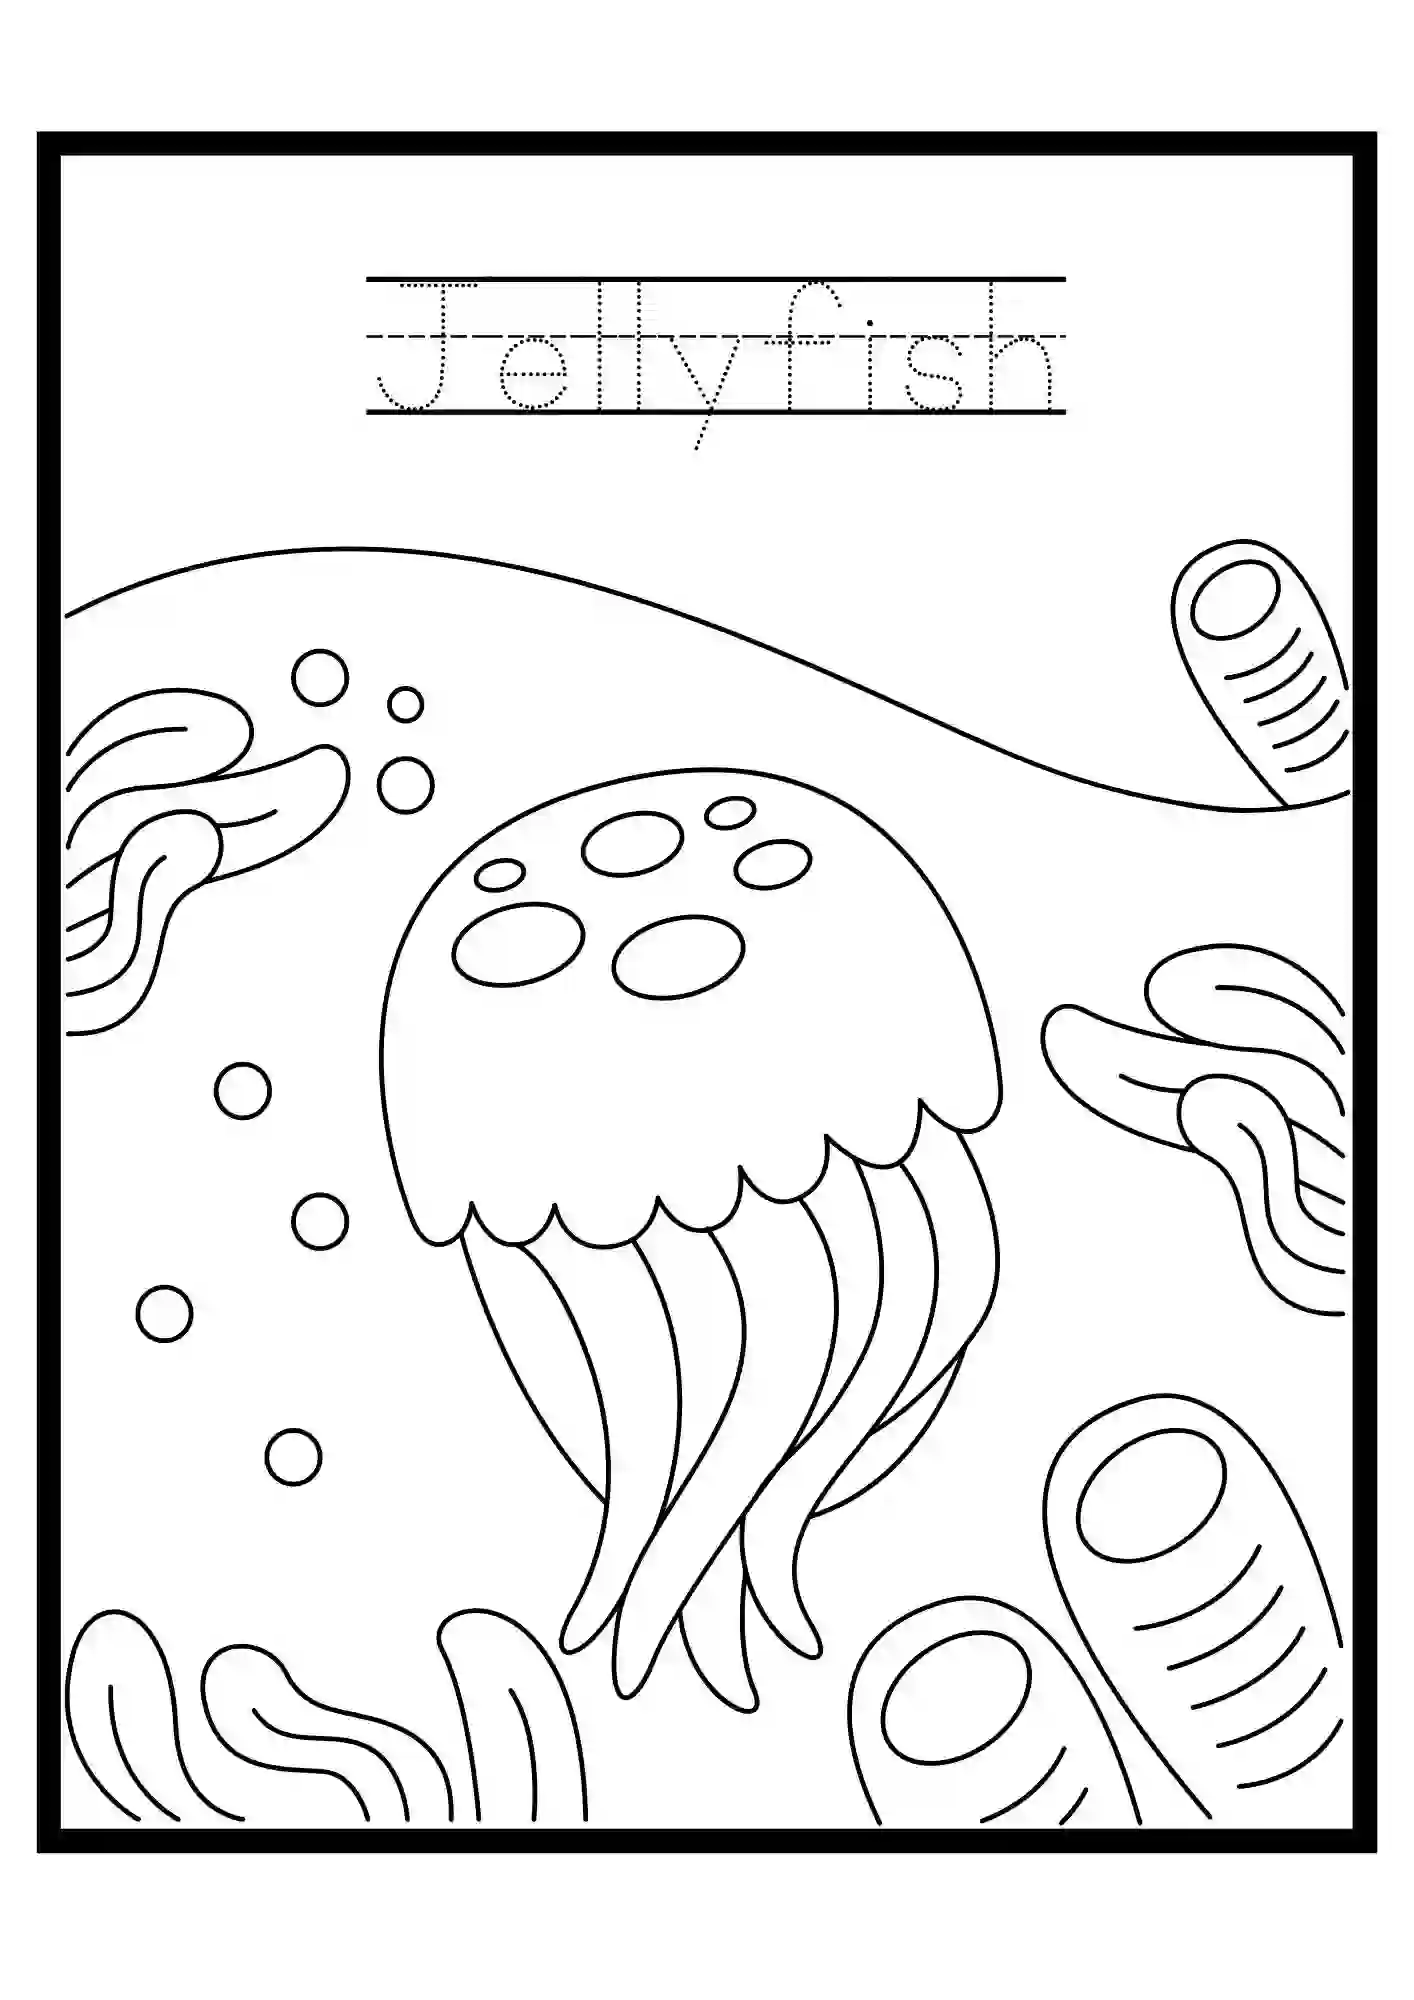 Under the Water Colouring Worksheets jellyfish